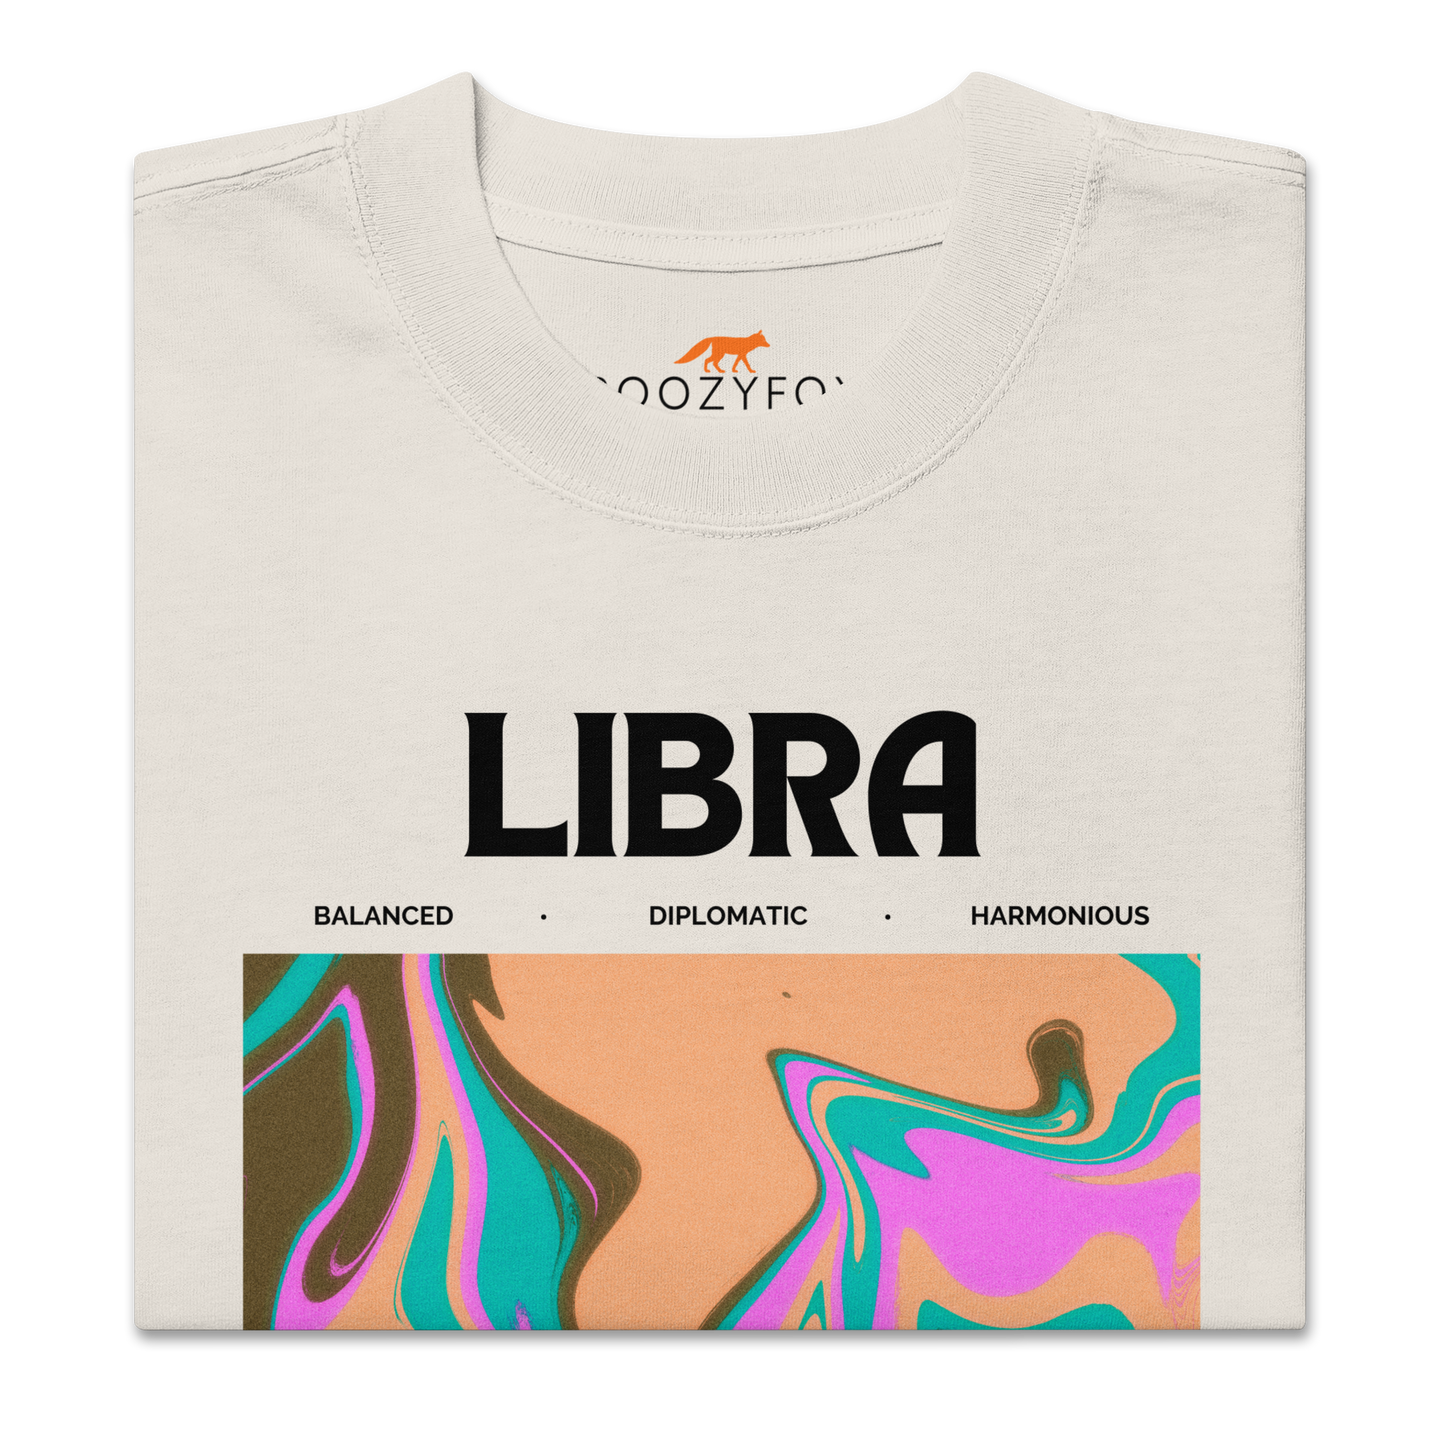 Front details of a Faded Bone Libra Oversized T-Shirt featuring an Abstract Libra Star Sign graphic on the chest - Cool Graphic Zodiac Oversized Tees - Boozy Fox